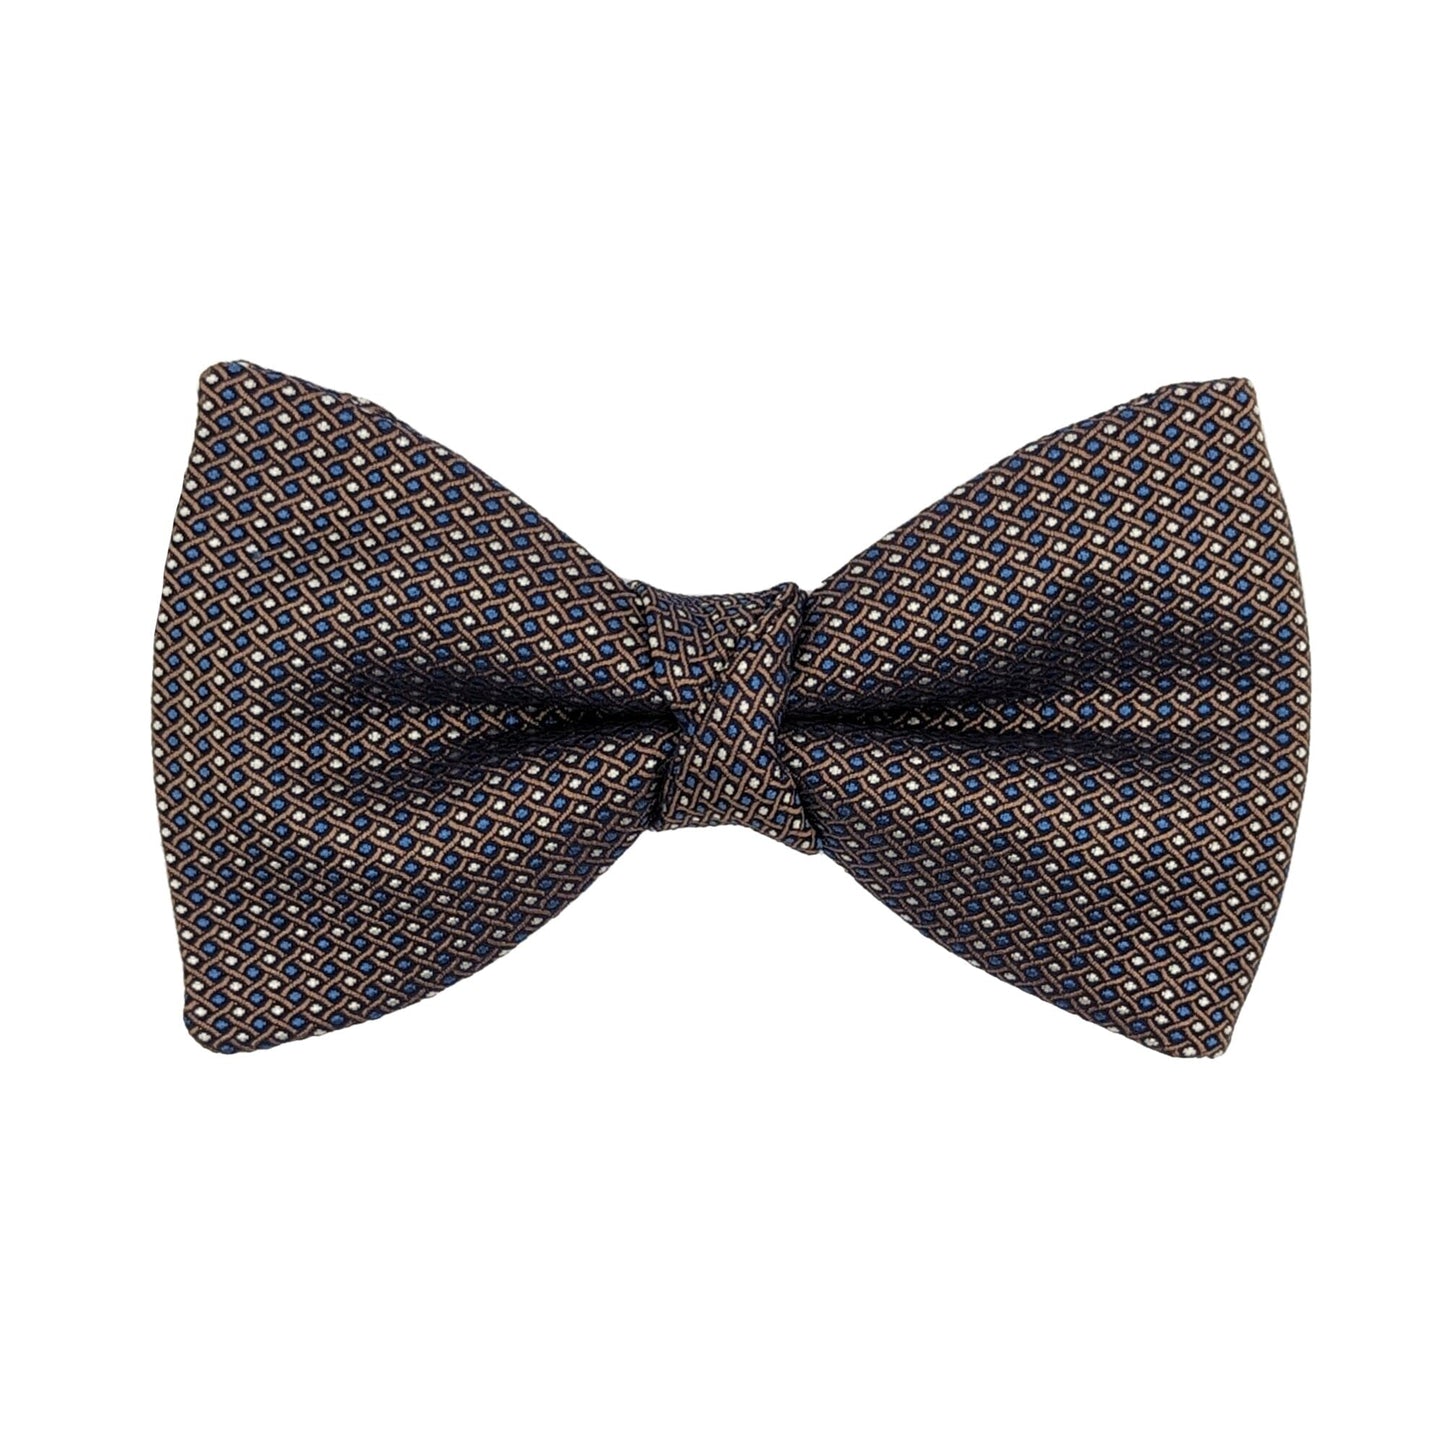 Delius Patterned Silk Bow Tie - Bow Ties - Ready-Tied - THREADPEPPER